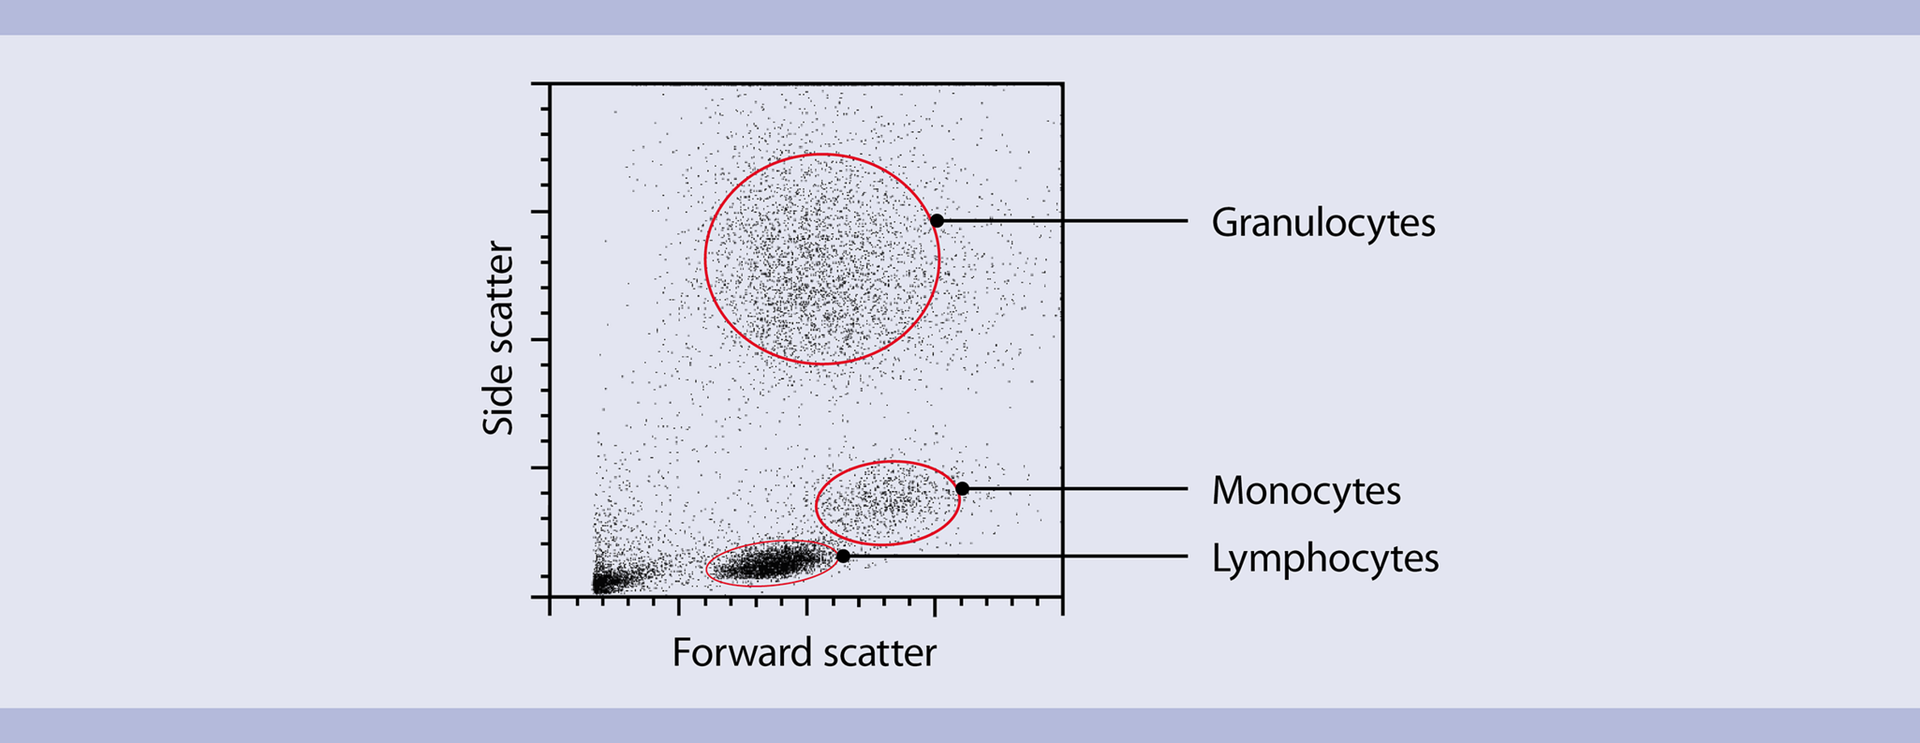 What Is Flow Cytometry?